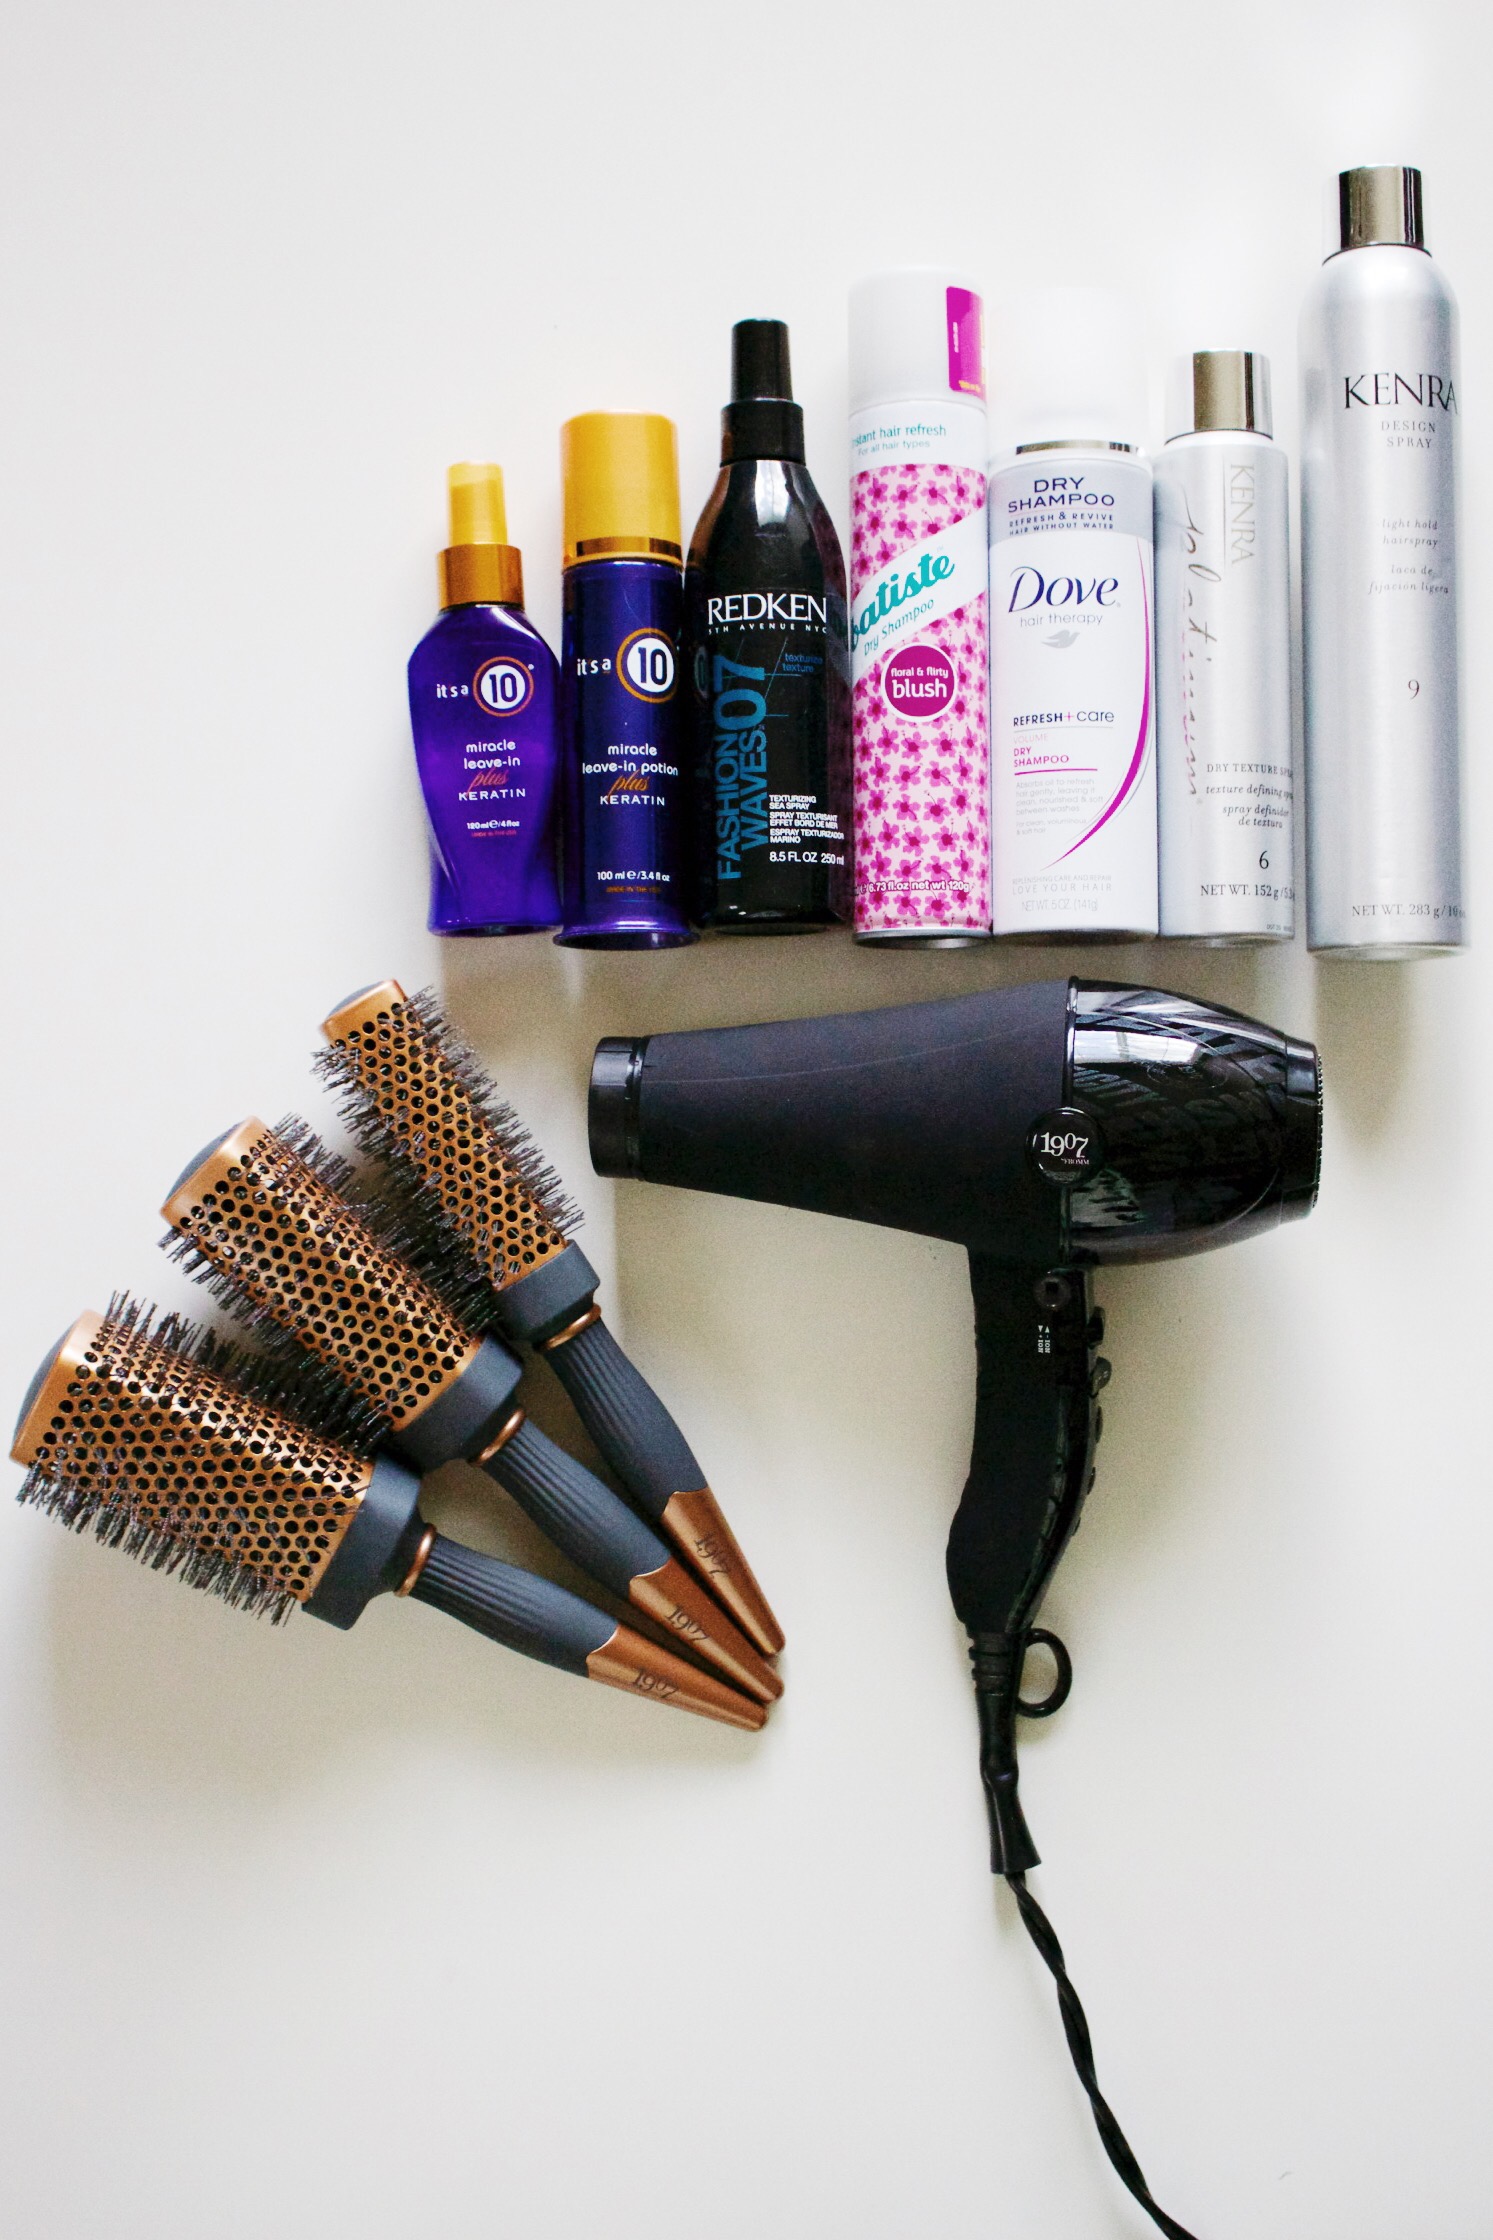 MY FAVORITE HAIR PRODUCTS